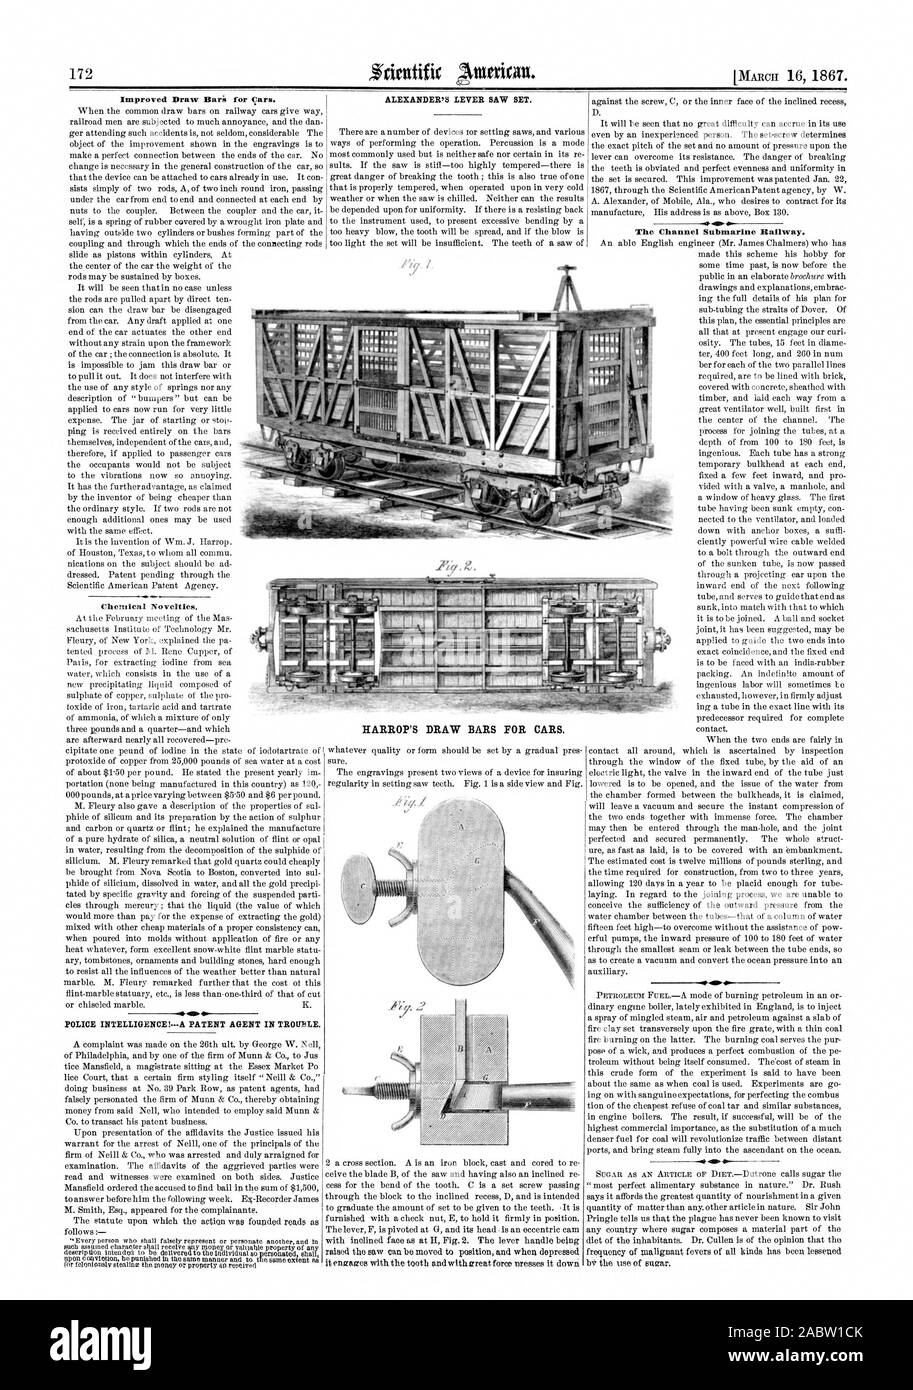 Improved Draw Bari for Cars. ALEXANDER'S LEVER SAW SET. HARROP'S DRAW BARS FOR CARS. The Channel Submarine Railway. POLICE INTELLIGENCE!A PATENT AGENT IN TROUBLE., scientific american, 67-03-16 Stock Photo